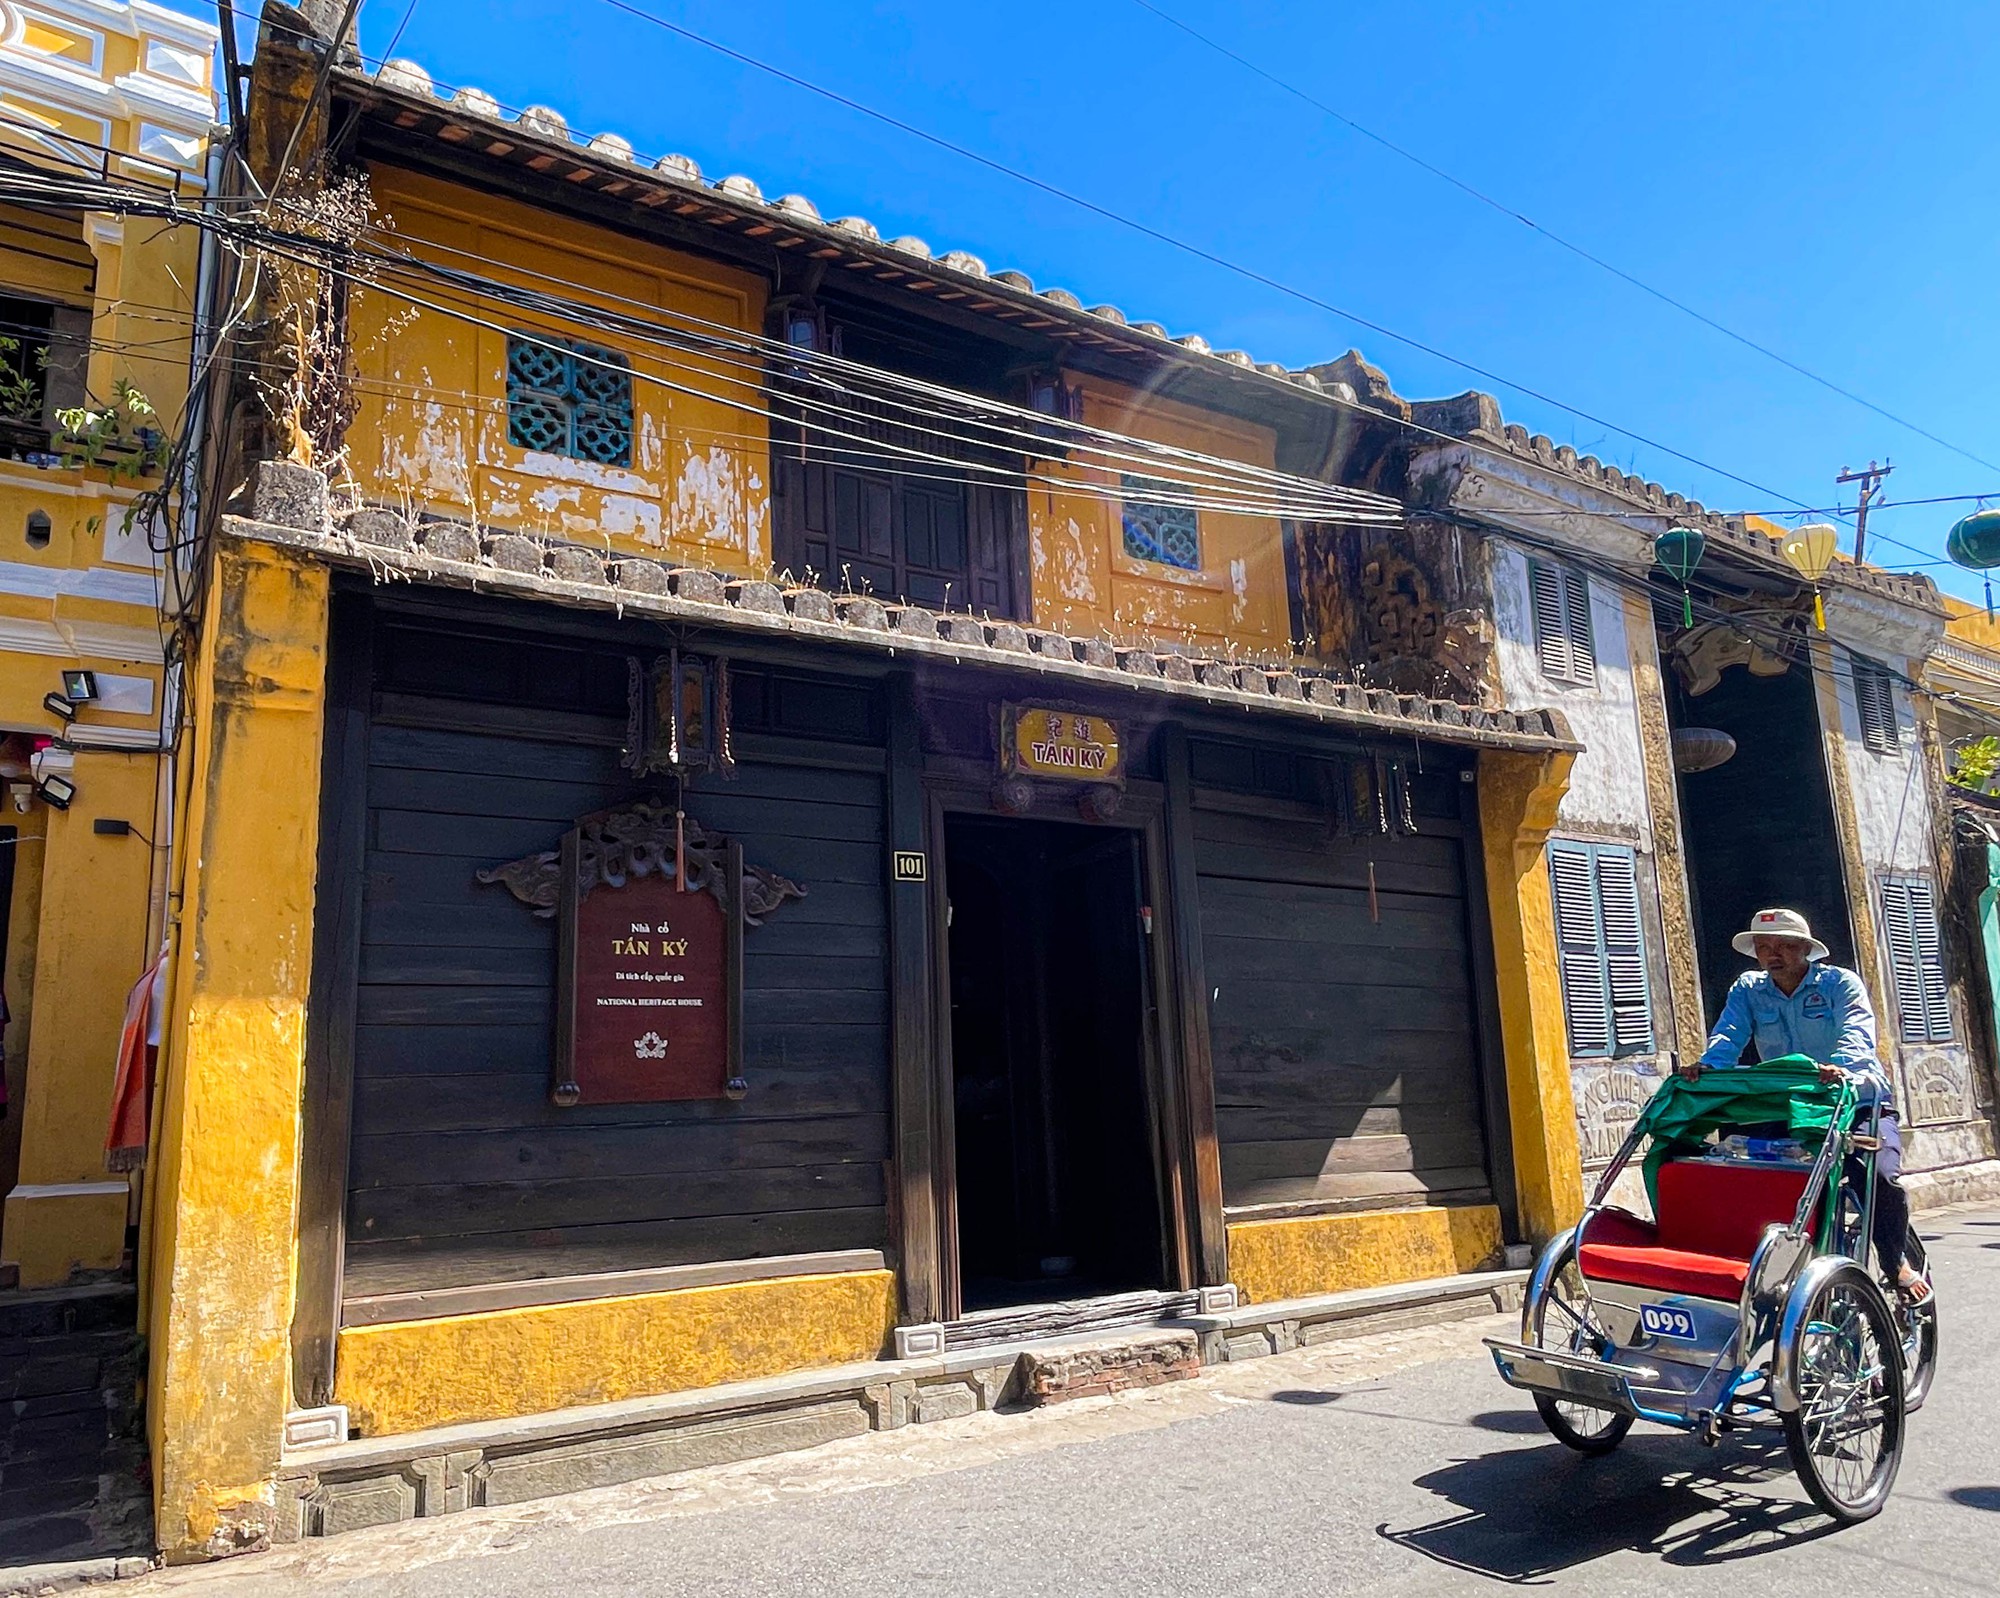 Tan Ky Old House in Hoi An Old Town, Vietnam